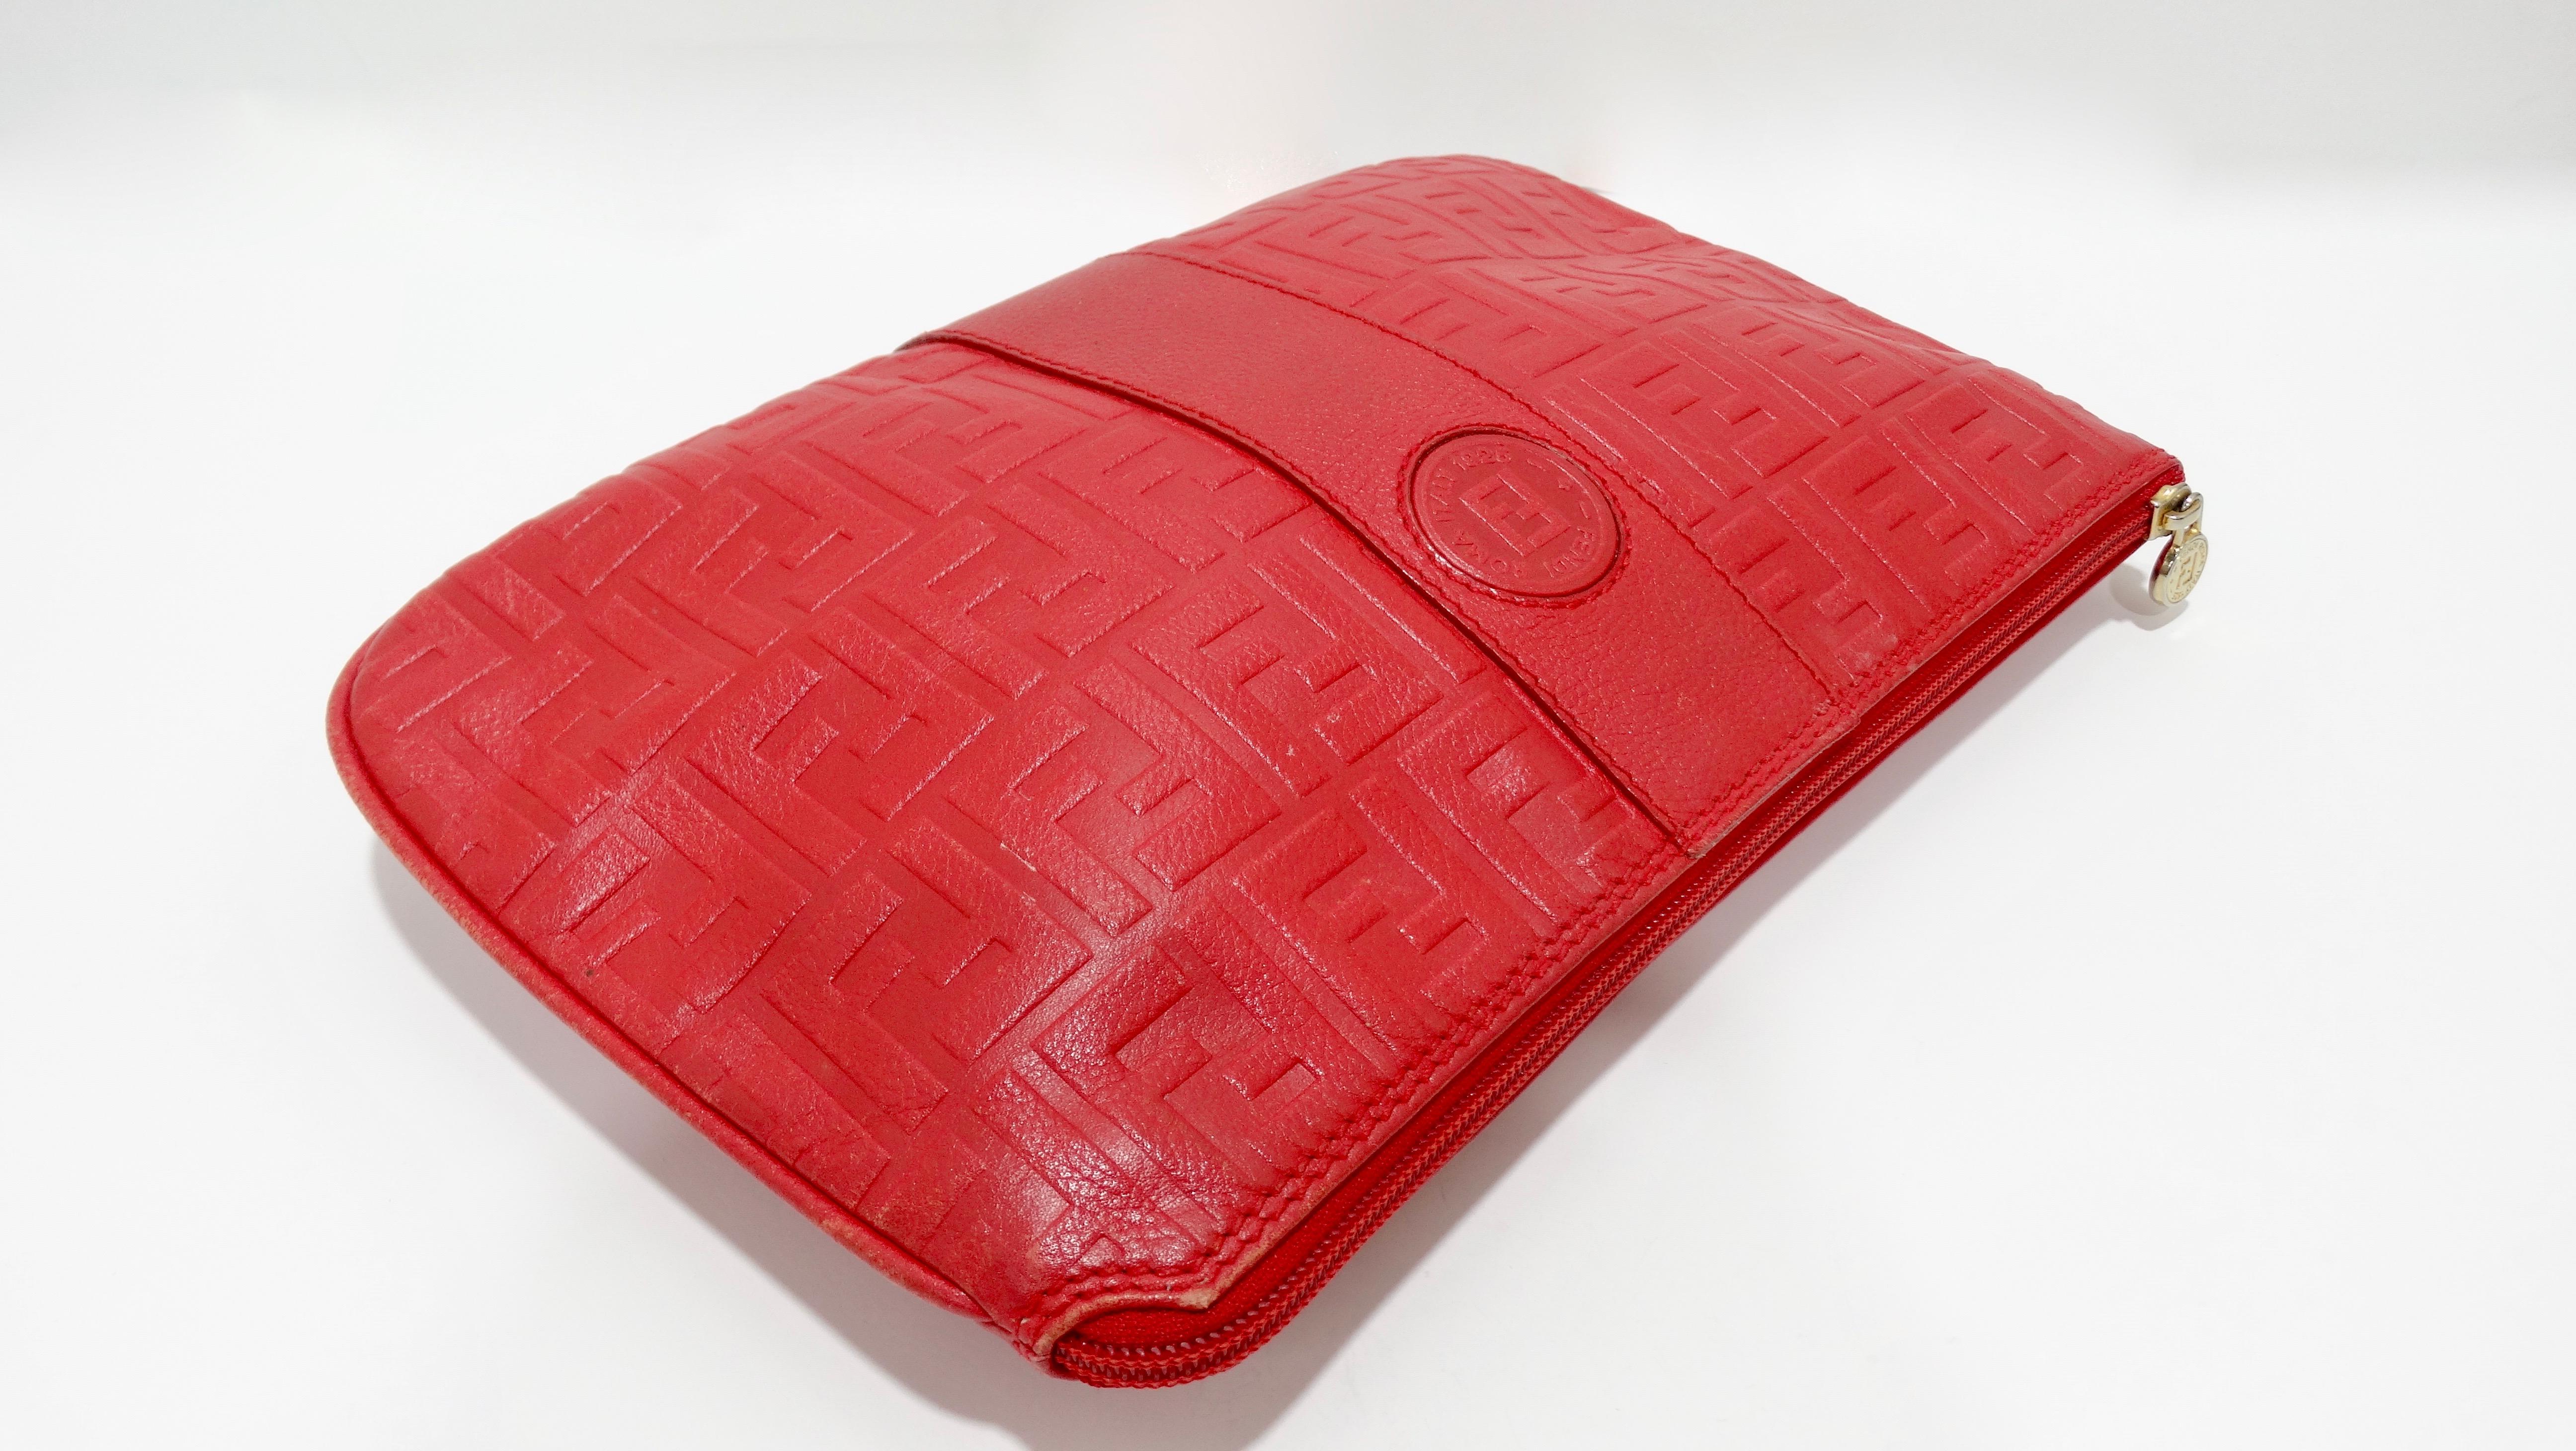 This Fendi is calling your name! Circa late 80s/early 90s, this large clutch is crafted from lipstick red leather and is embossed allover with the iconic Fendi monogram. Features gold hardware, a stamped zipper pull and on the front face is a